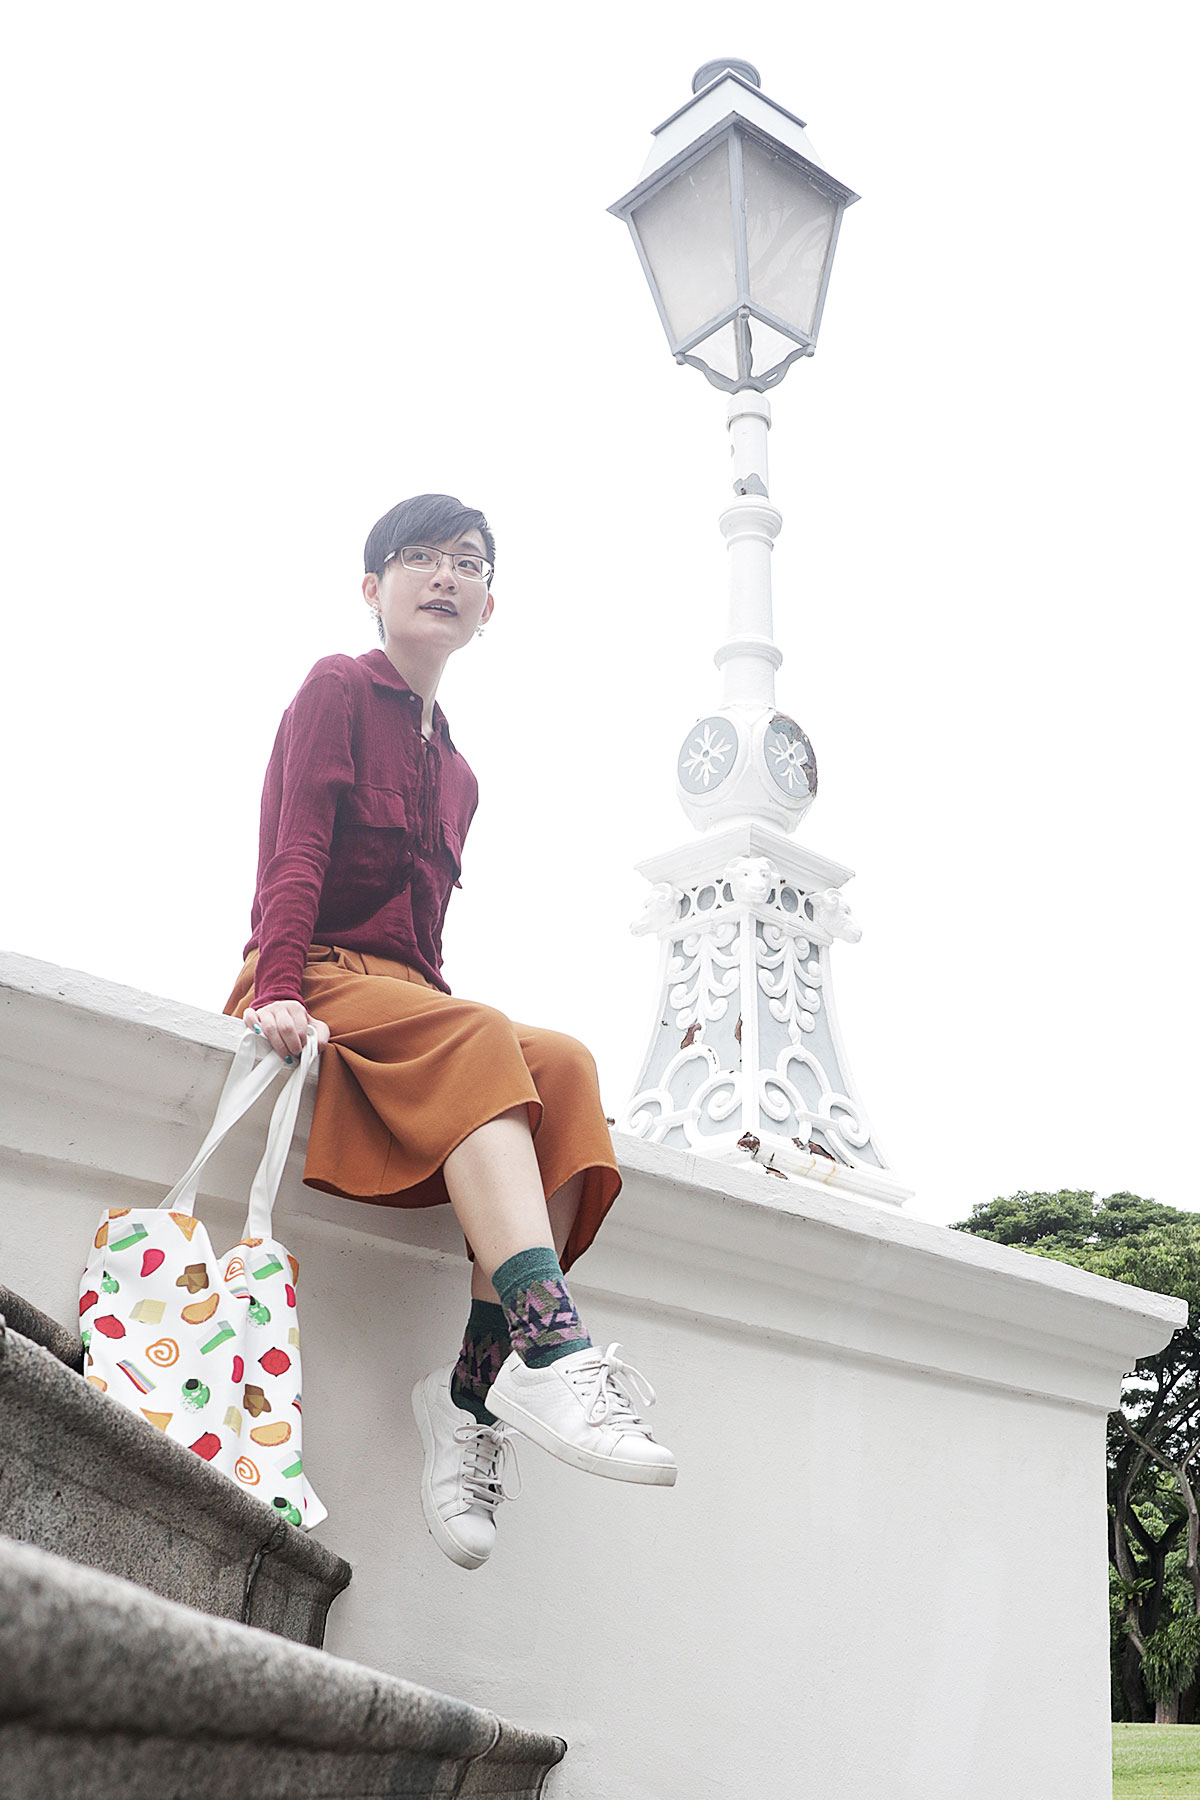 OOTD: Pomelo Fashion blouse, Mango pants, OWNDAYS glasses, Paper Planes sneakers.